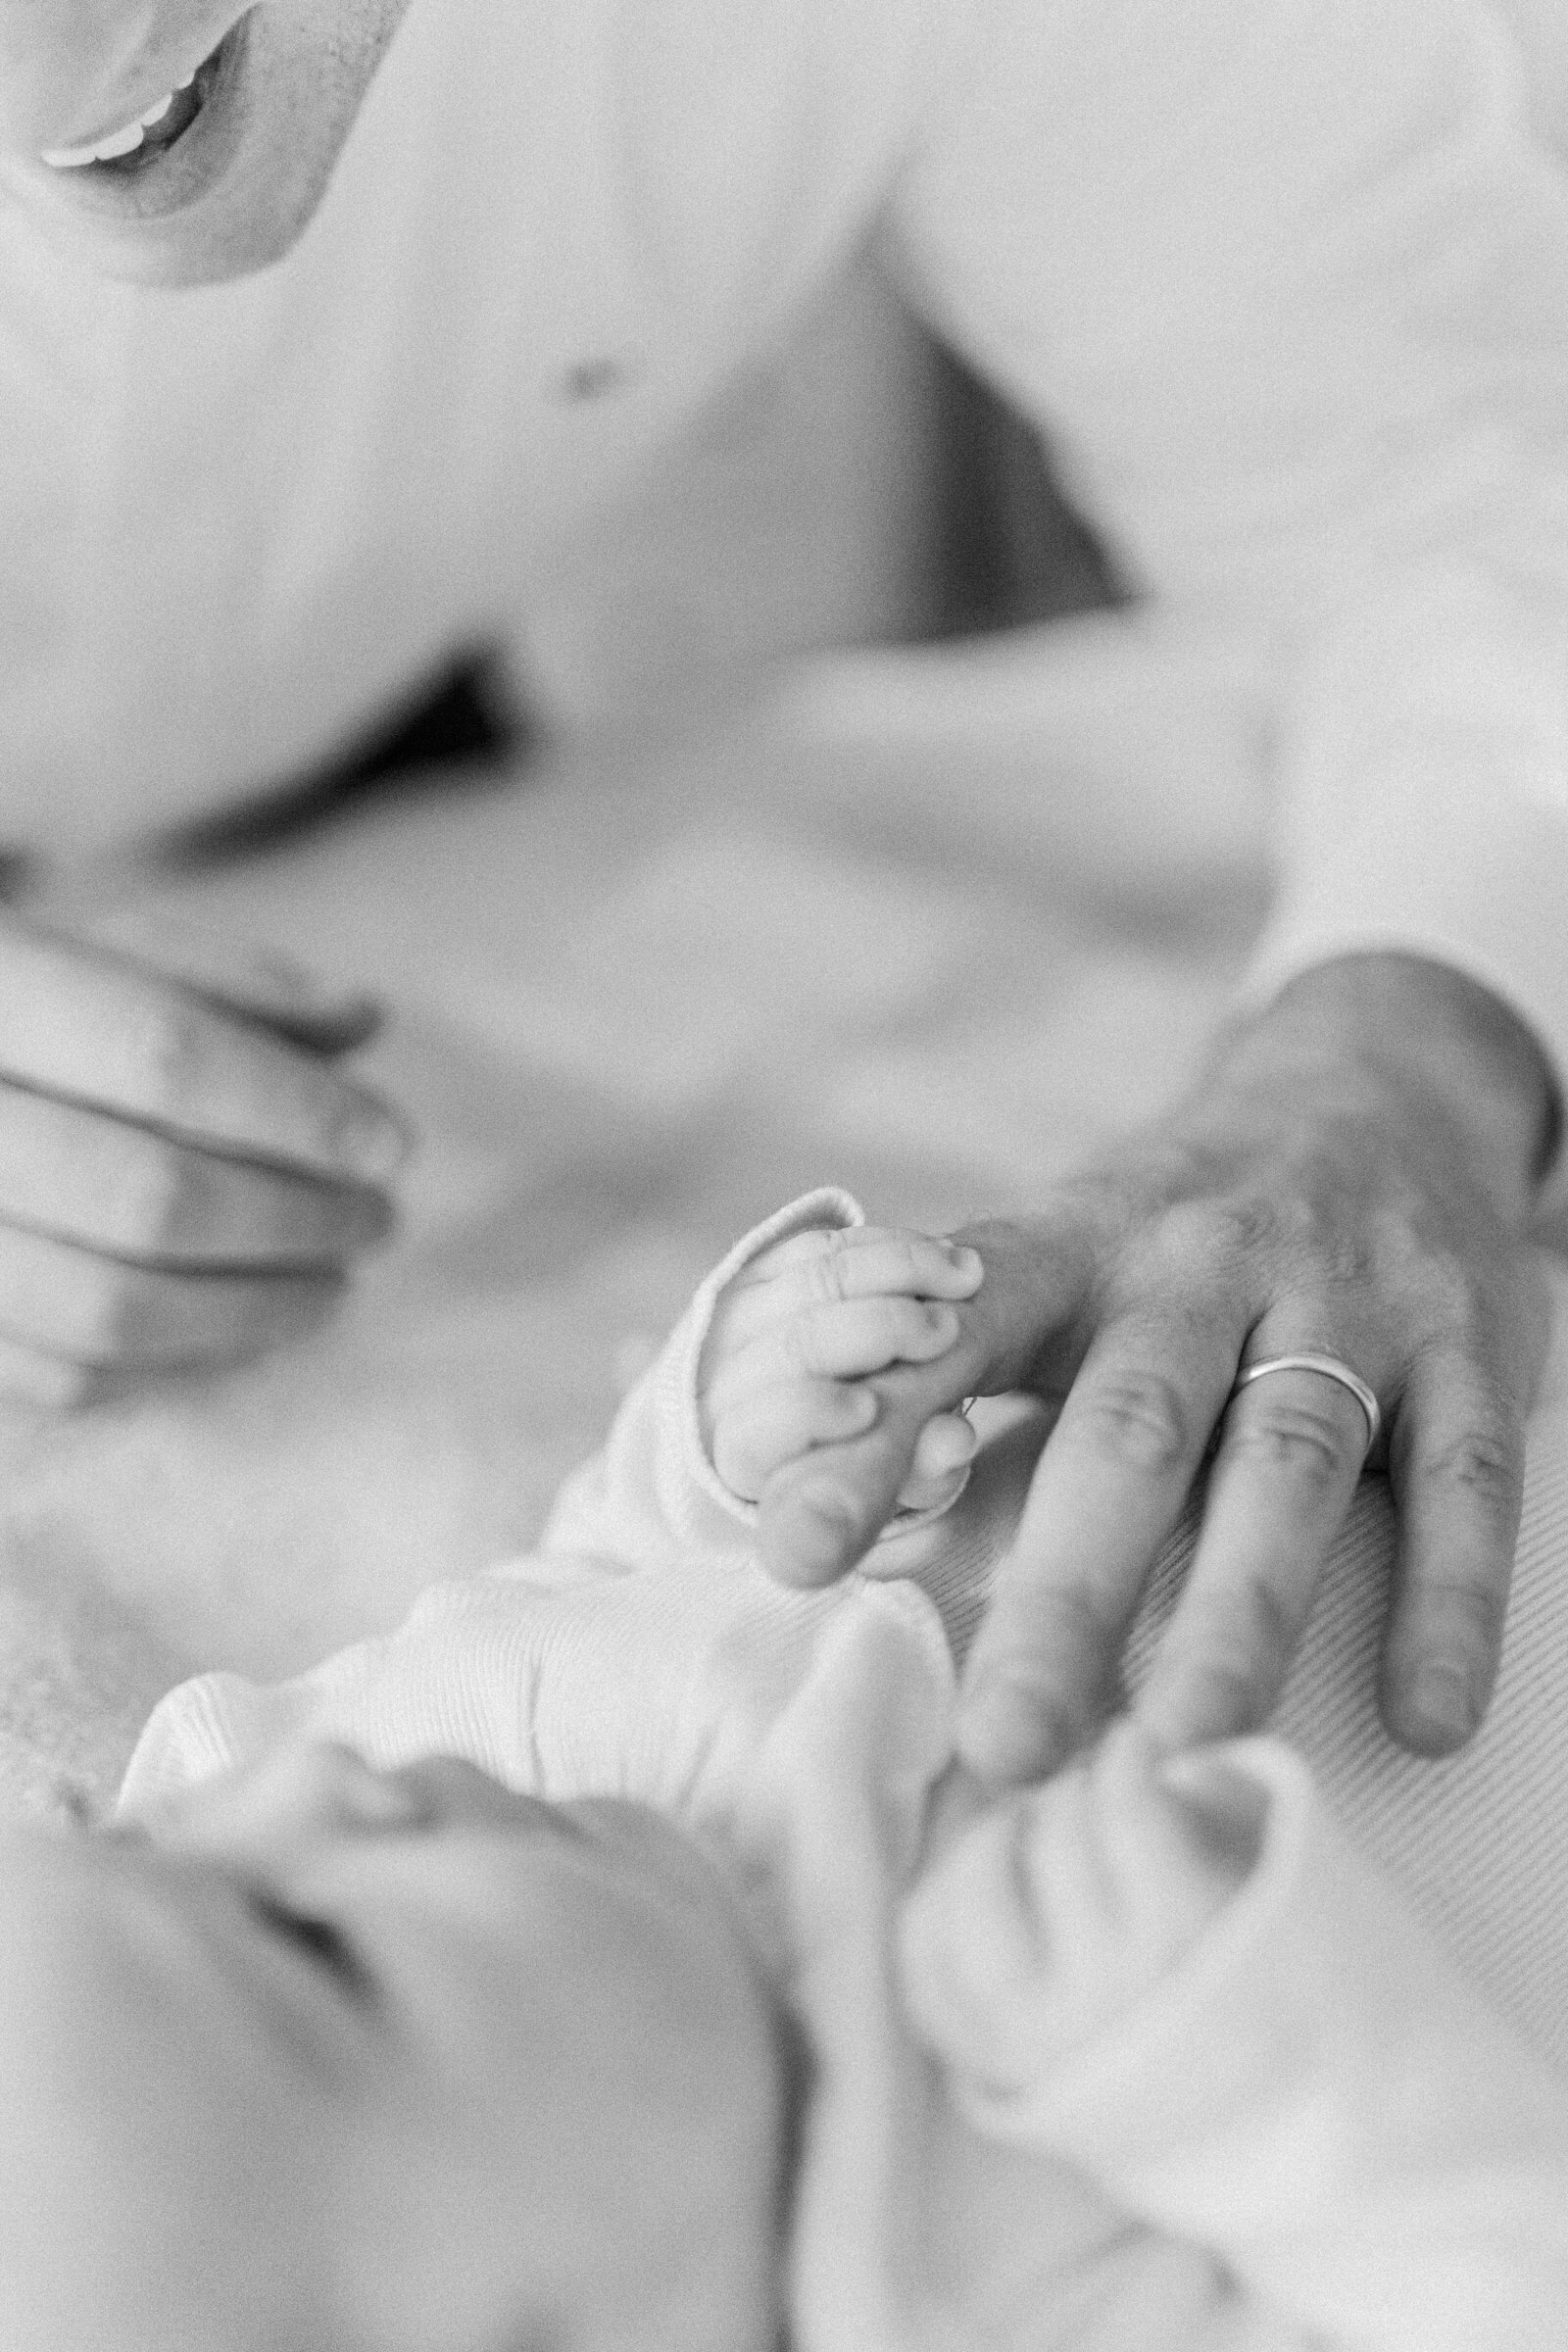 A close up black and white image of a father resting his hand on his baby girl's stomach while she grasps his finger during photo session with Boston newborn photographer Corinne Isabelle